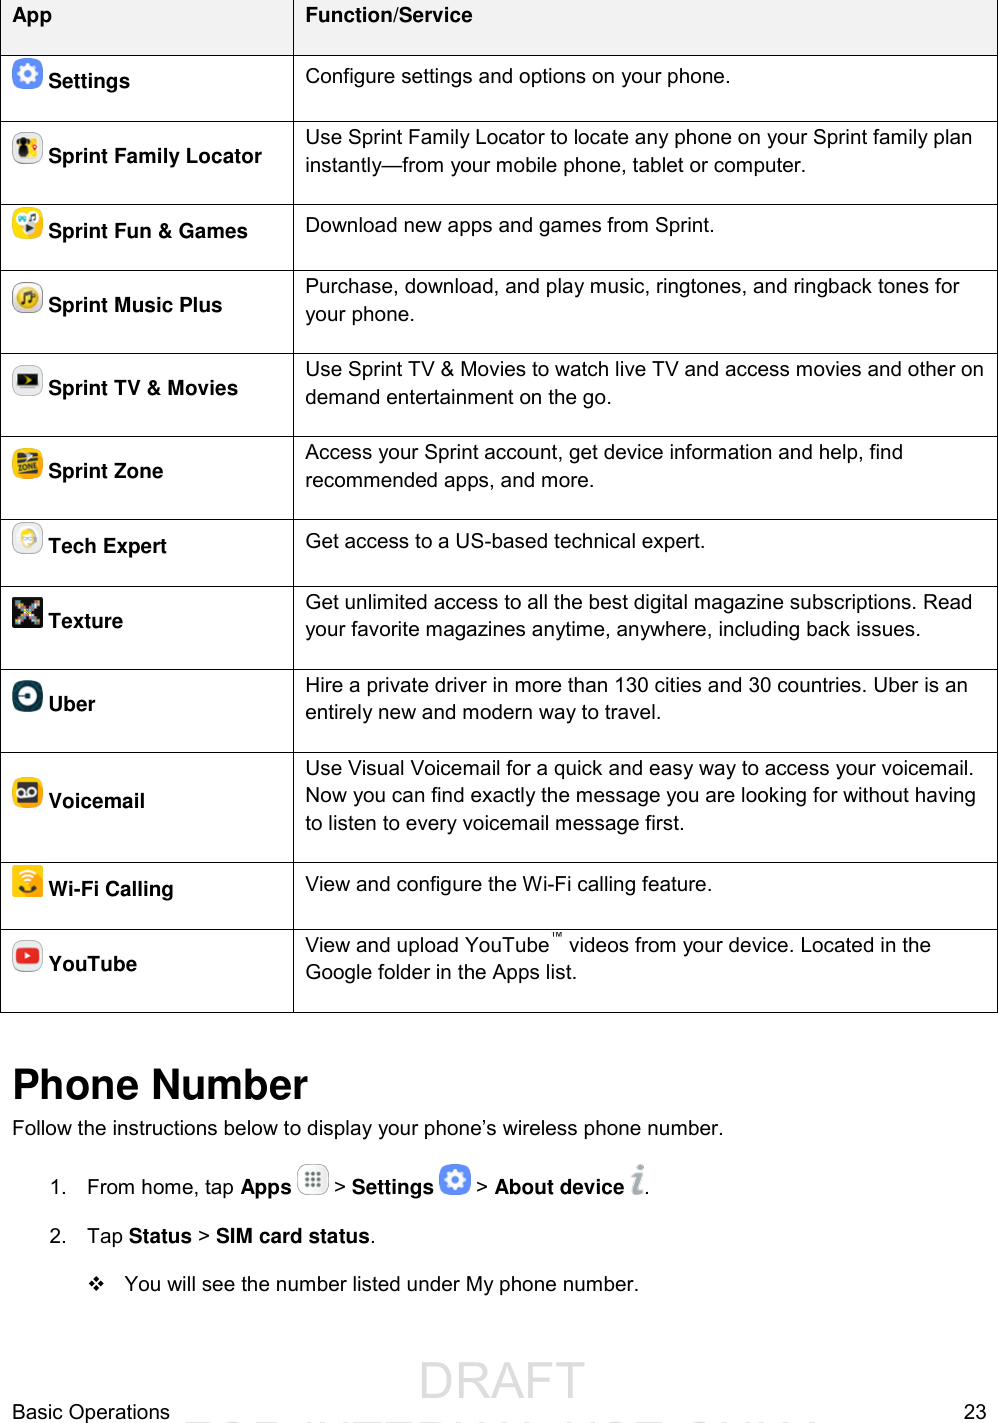                  DRAFT FOR INTERNAL USE ONLYBasic Operations  23 App Function/Service  Settings Configure settings and options on your phone.  Sprint Family Locator Use Sprint Family Locator to locate any phone on your Sprint family plan instantly—from your mobile phone, tablet or computer.   Sprint Fun &amp; Games Download new apps and games from Sprint.  Sprint Music Plus Purchase, download, and play music, ringtones, and ringback tones for your phone.   Sprint TV &amp; Movies Use Sprint TV &amp; Movies to watch live TV and access movies and other on demand entertainment on the go.  Sprint Zone Access your Sprint account, get device information and help, find recommended apps, and more.  Tech Expert Get access to a US-based technical expert.  Texture Get unlimited access to all the best digital magazine subscriptions. Read your favorite magazines anytime, anywhere, including back issues.  Uber Hire a private driver in more than 130 cities and 30 countries. Uber is an entirely new and modern way to travel.  Voicemail Use Visual Voicemail for a quick and easy way to access your voicemail. Now you can find exactly the message you are looking for without having to listen to every voicemail message first.   Wi-Fi Calling View and configure the Wi-Fi calling feature.  YouTube View and upload YouTube™ videos from your device. Located in the Google folder in the Apps list.  Phone Number Follow the instructions below to display your phone’s wireless phone number. 1.  From home, tap Apps   &gt; Settings   &gt; About device  . 2.  Tap Status &gt; SIM card status.   You will see the number listed under My phone number.  